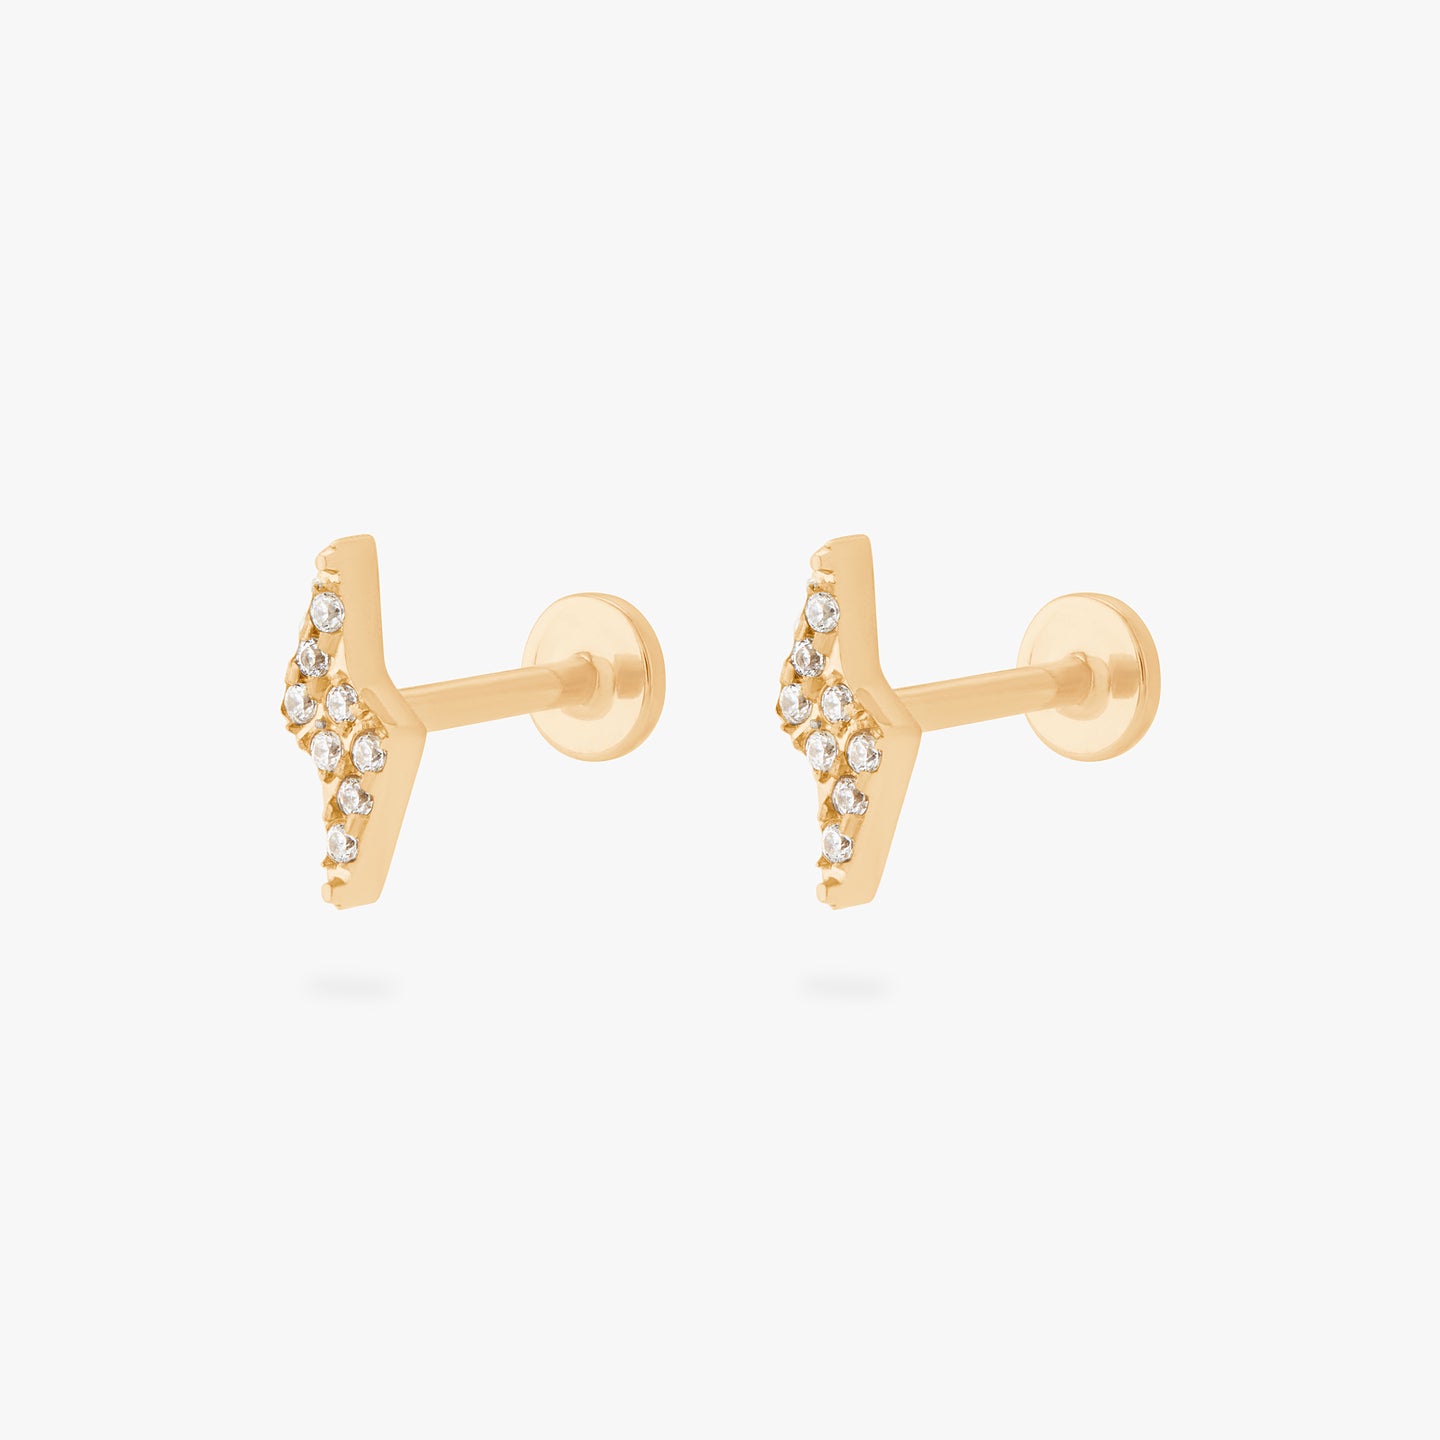 This is an image of a pair of gold/clear pave lightning-bolt shaped flatback tops with gold labrets with circle discs that have an 